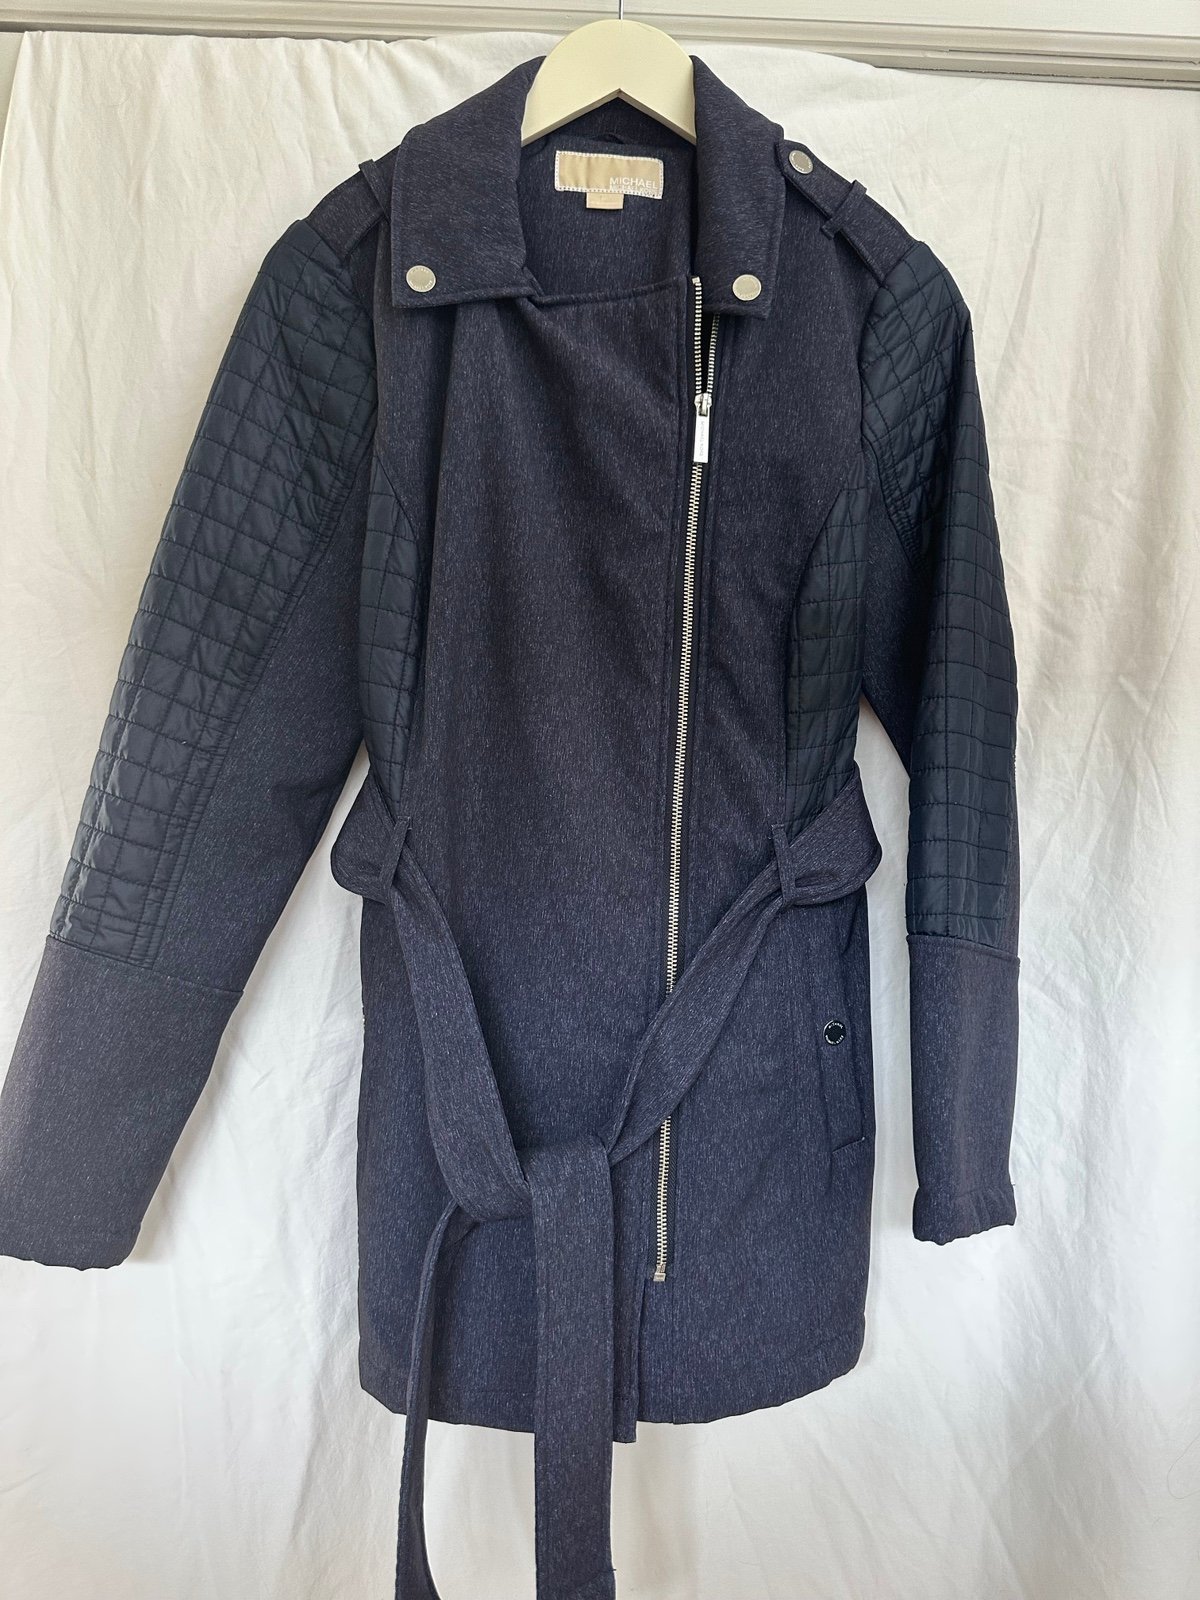 Classic Coat kD269ypyO Outlet Store